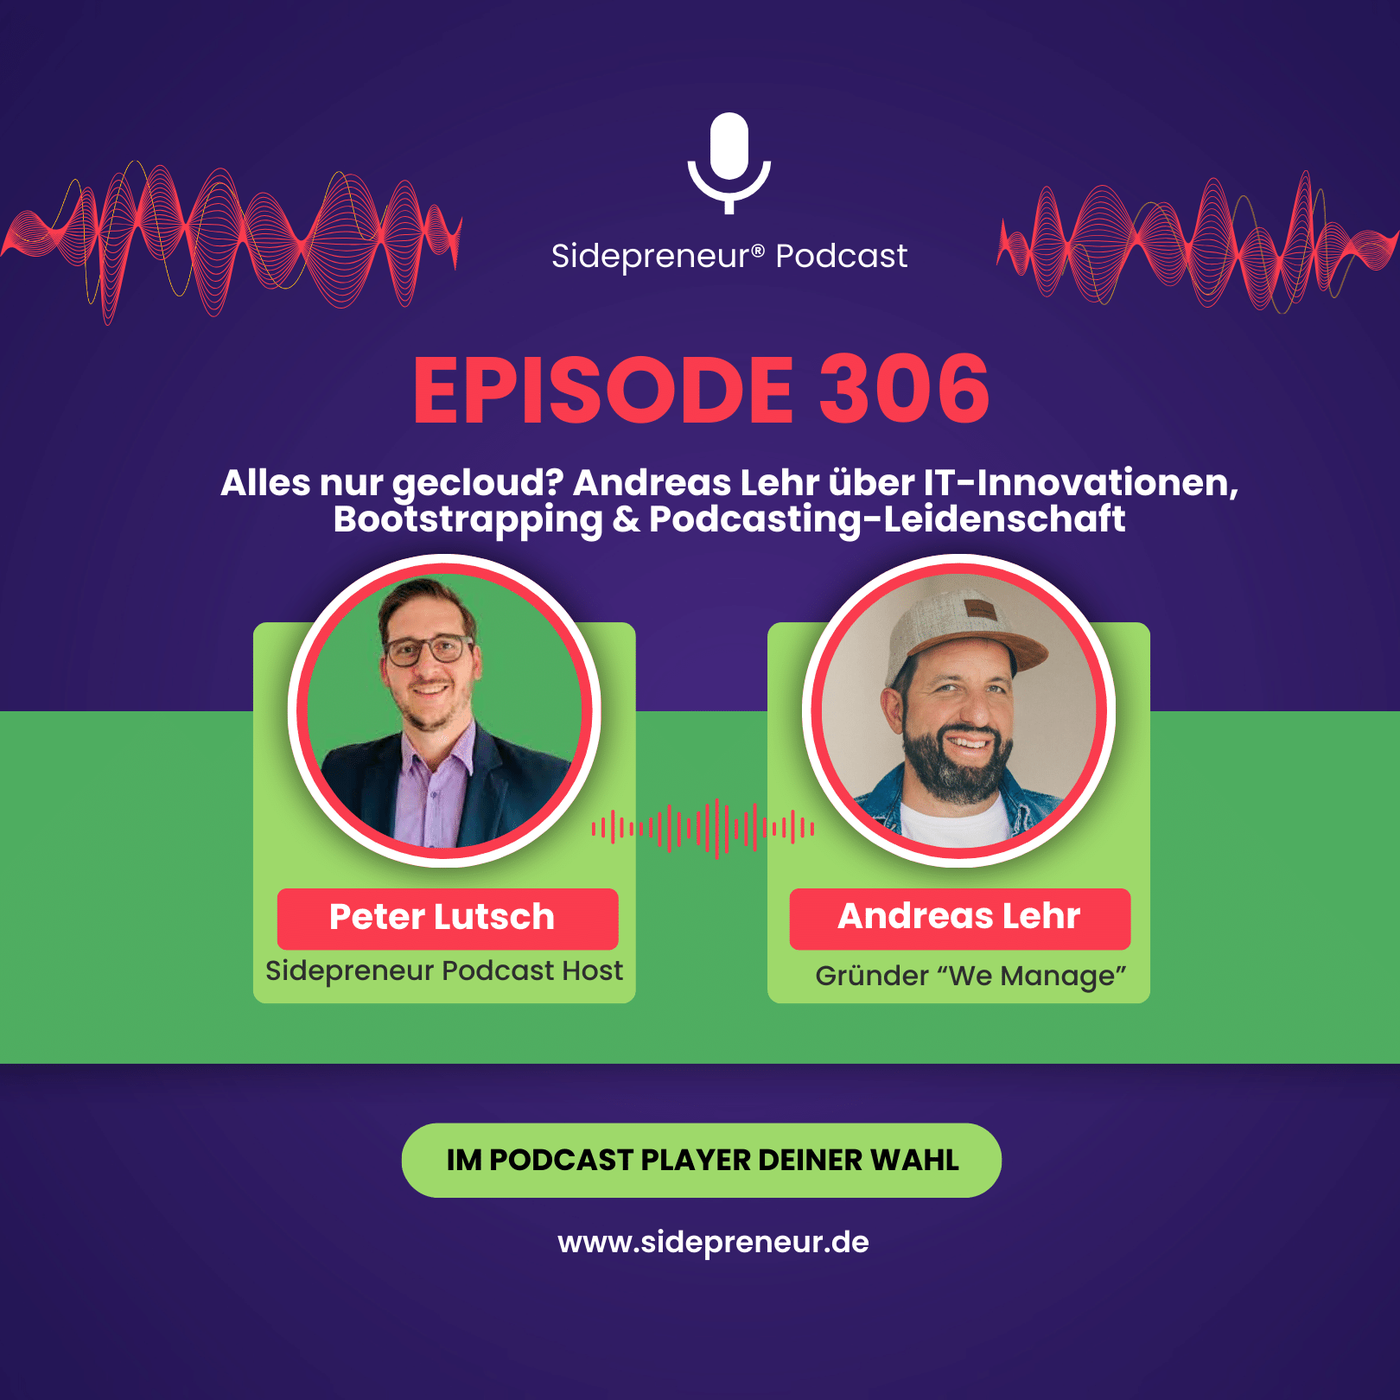 SP306 - Alles nur gecloud? Andreas Lehr über IT-Innovationen, Bootstrapping & Podcasting-Leidenschaft